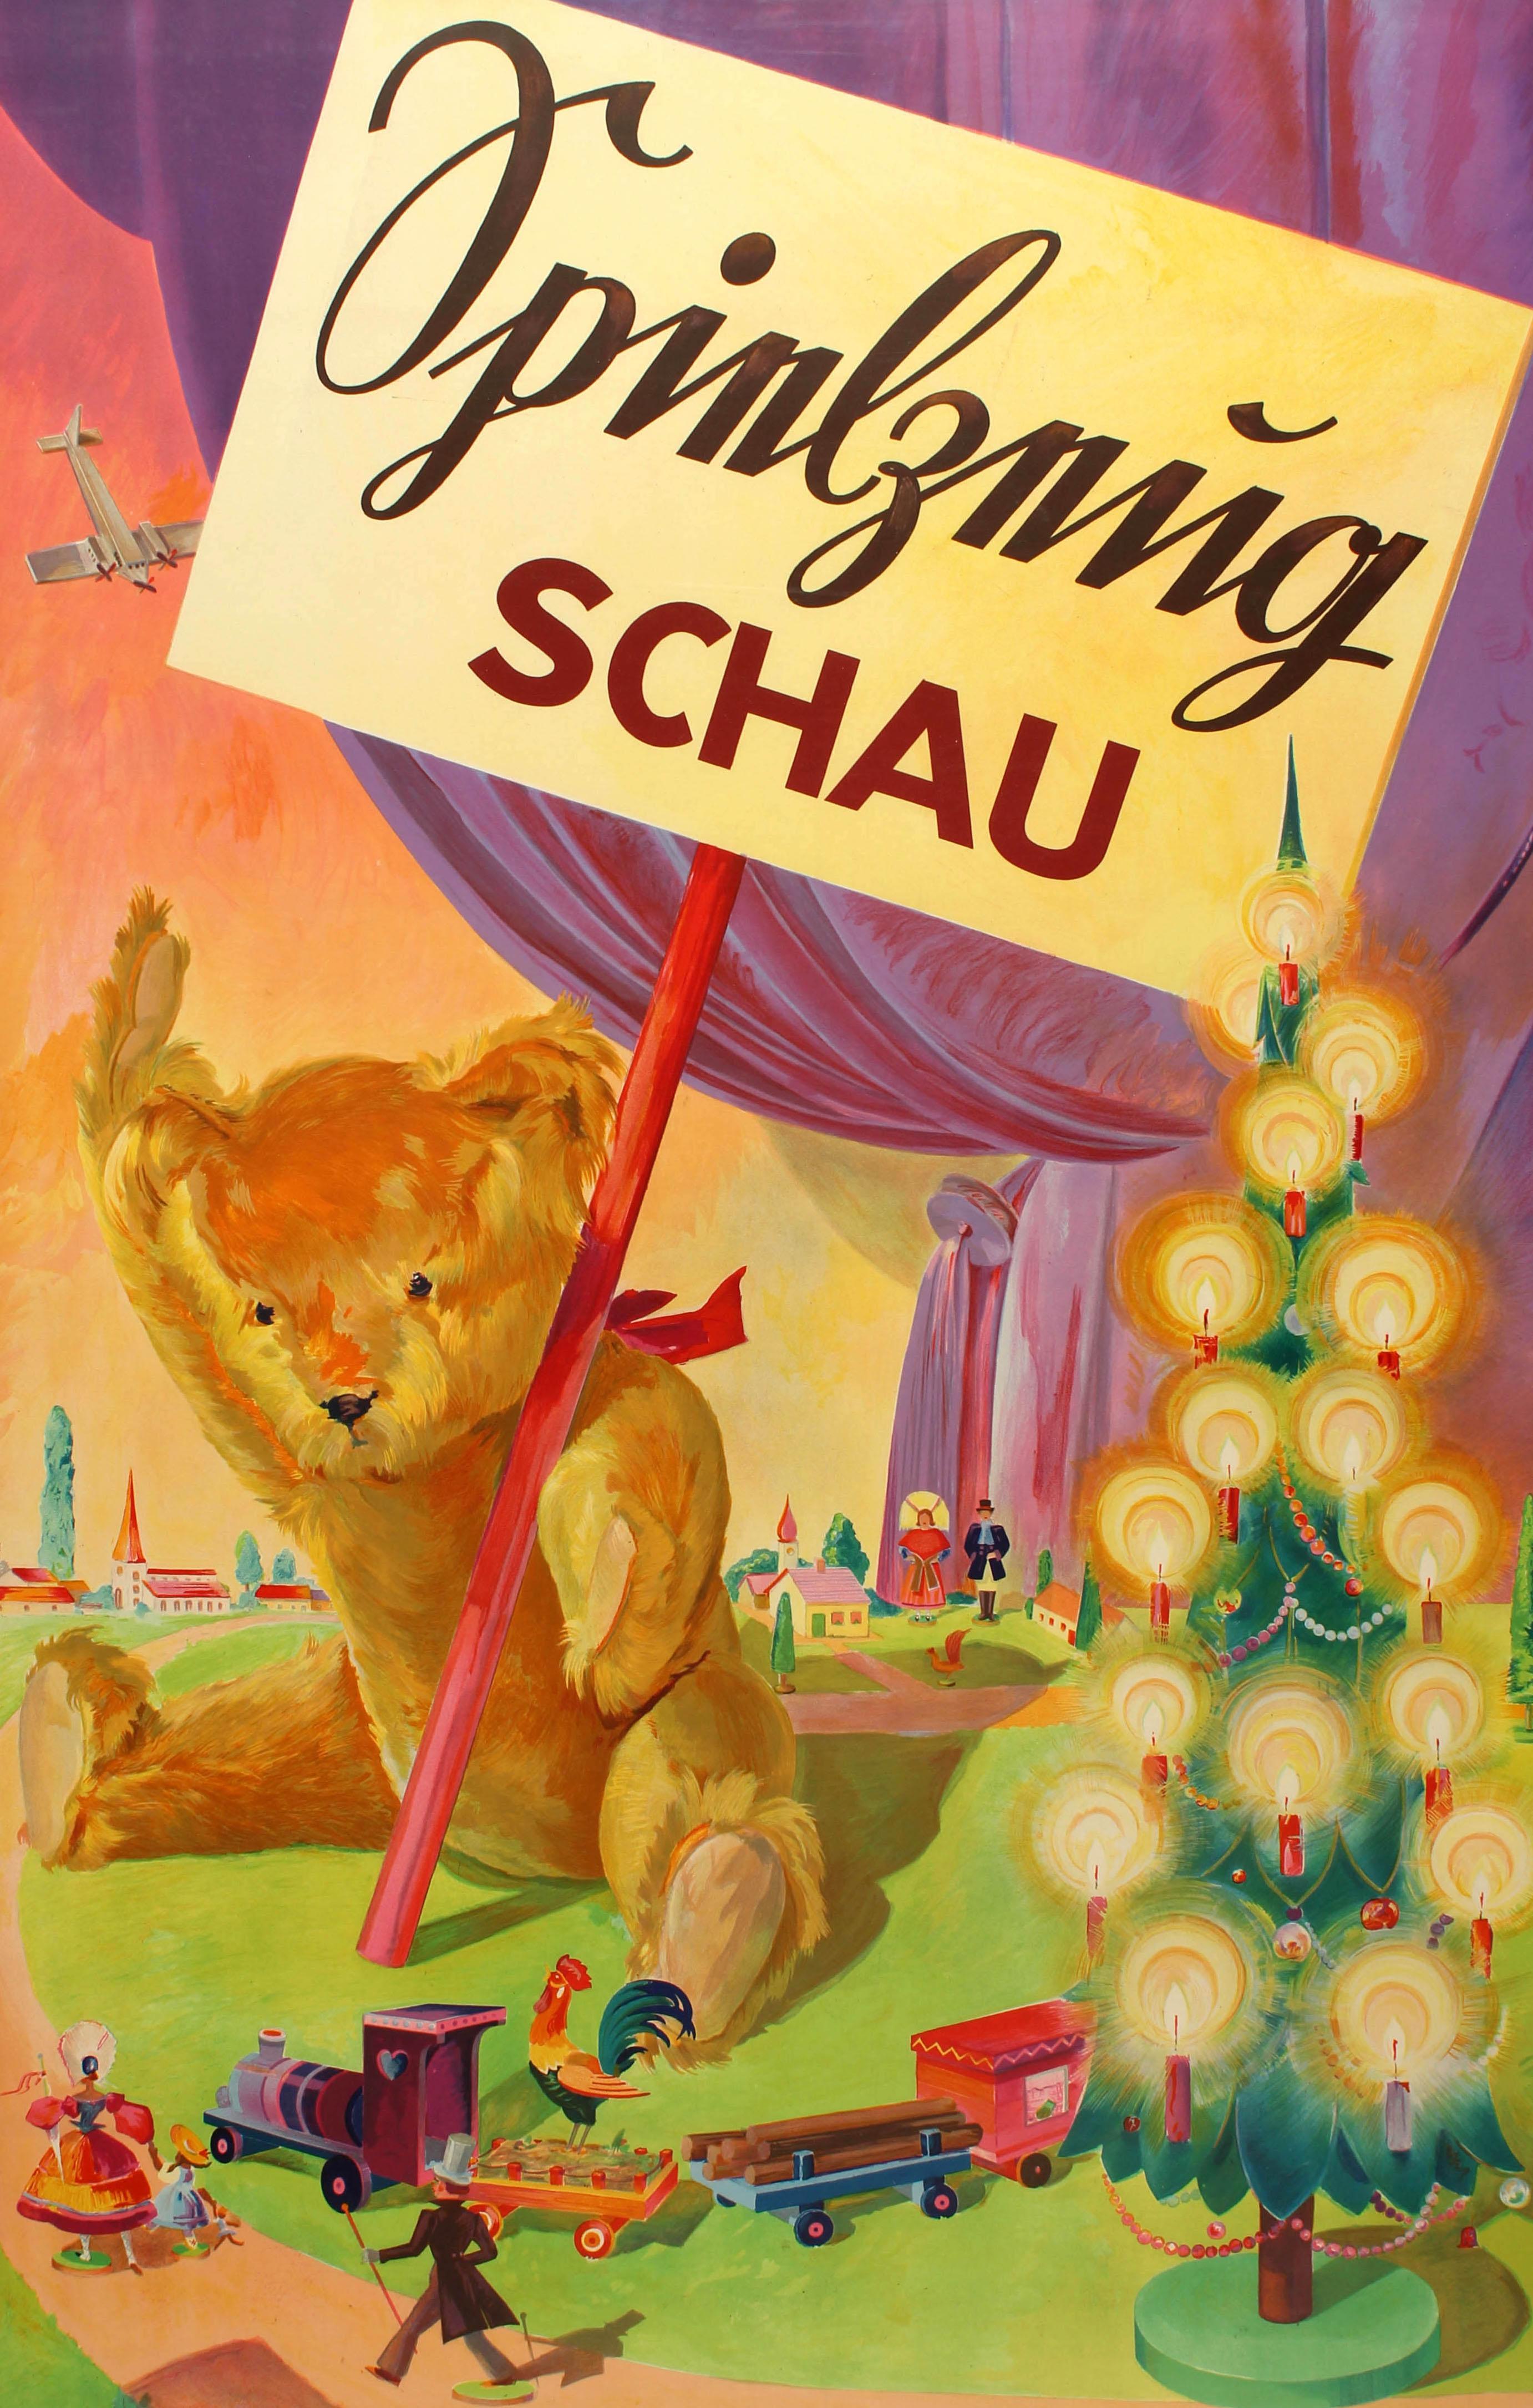 Original vintage poster for a toy exhibition featuring a colorful illustration of a teddy bear waving to the viewer while holding a sign for the exhibition, surrounded by a wooden toy train, an illuminated Christmas tree, various toys and figurines,